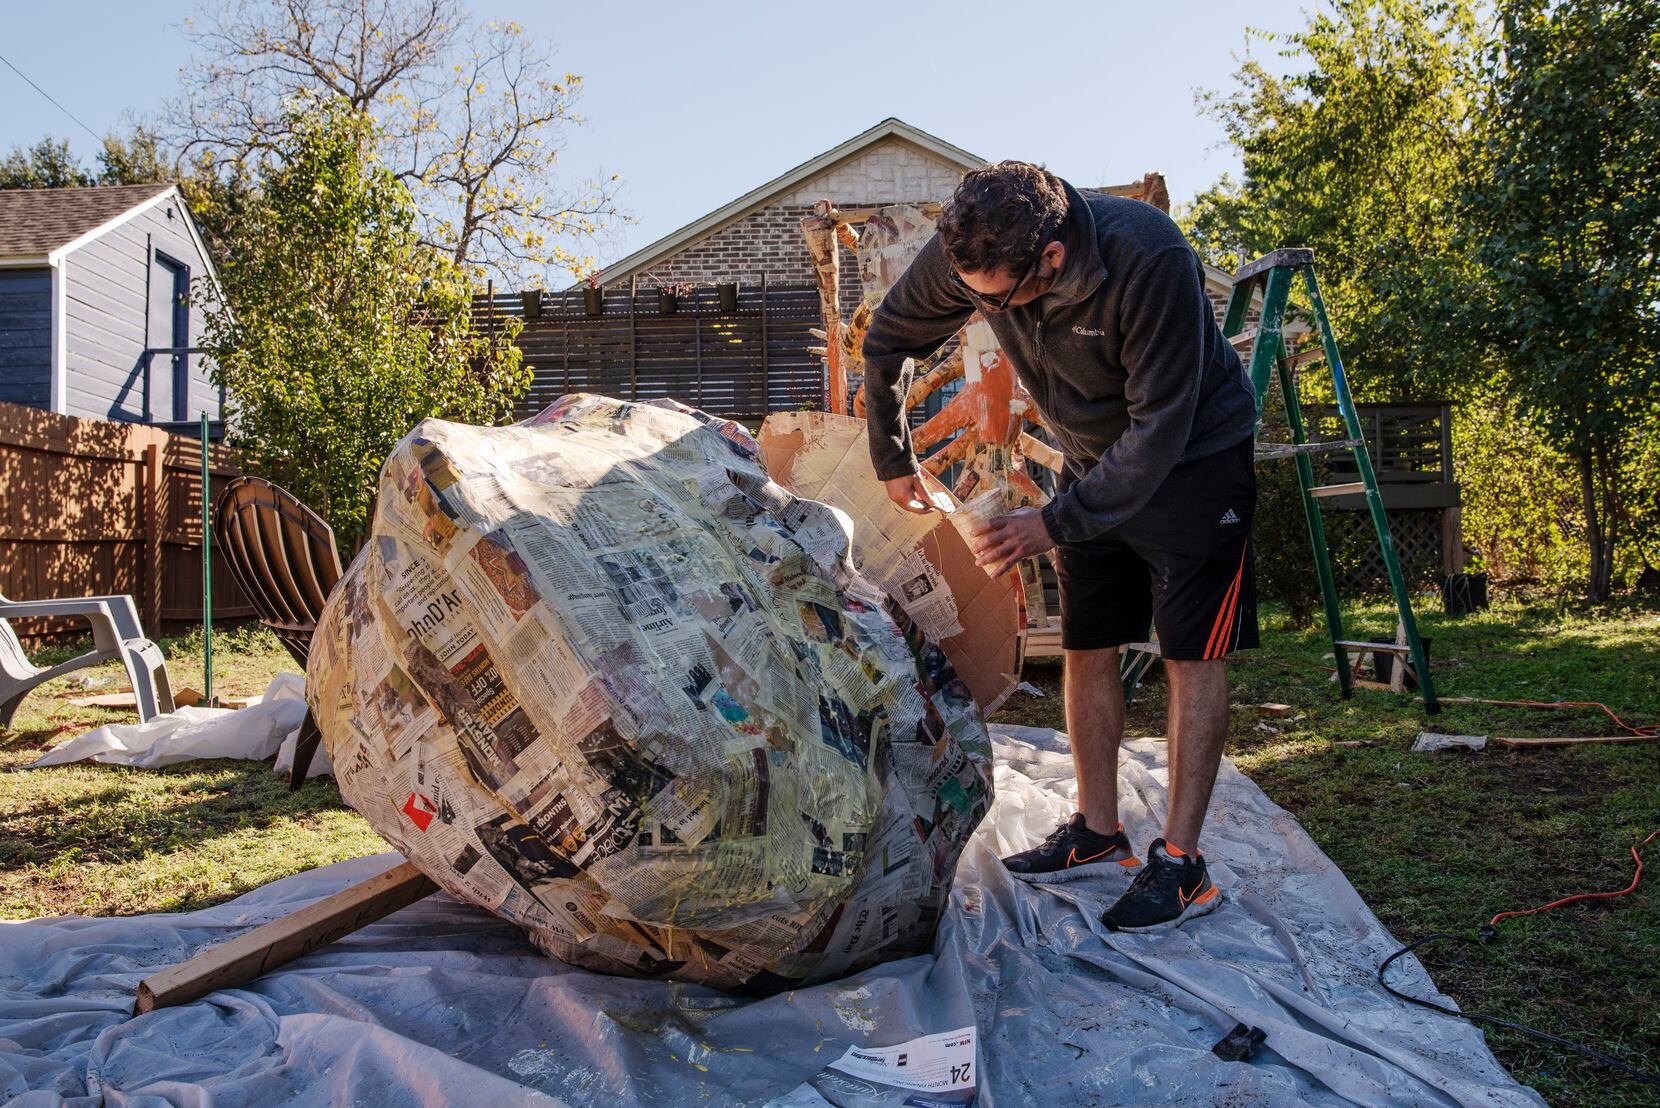 Artist Giovanni Valderas adds glue to a giant calavera, or human skull sculpture, in his back yard in Dallas on Friday.